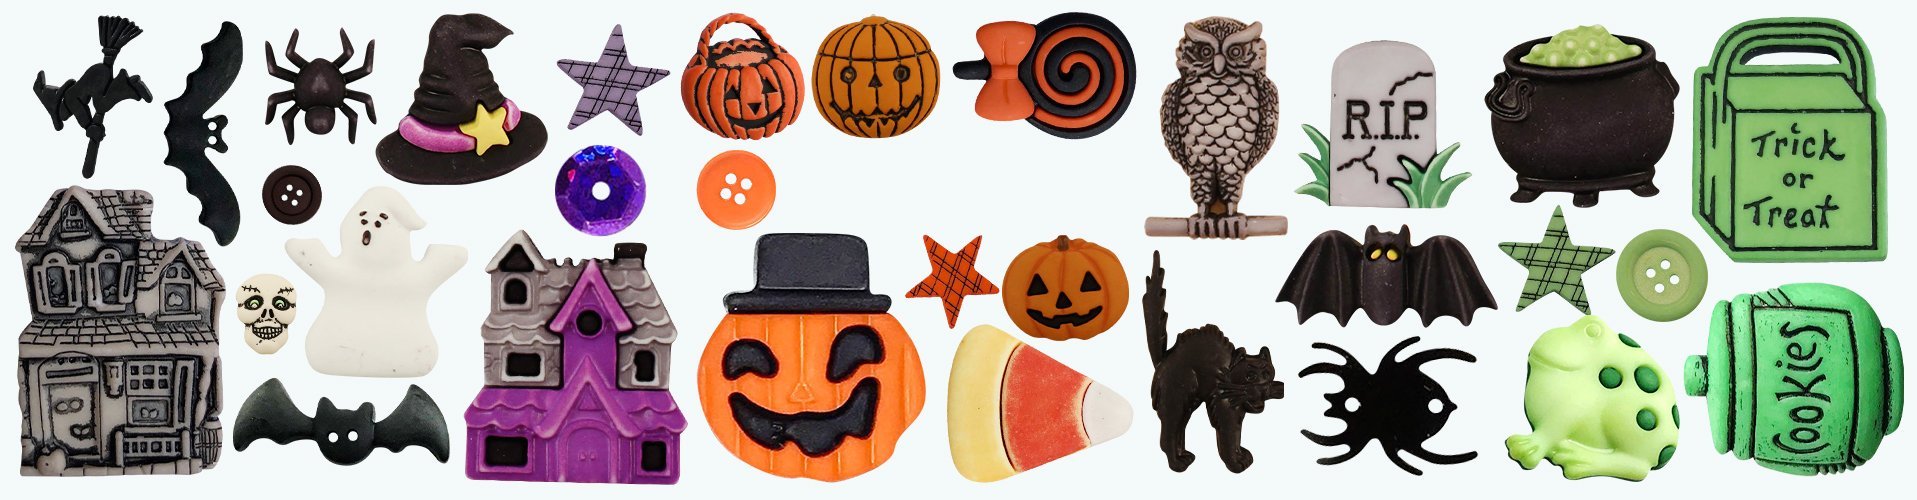 Halloween Theme Buttons | Buttons Galore and More